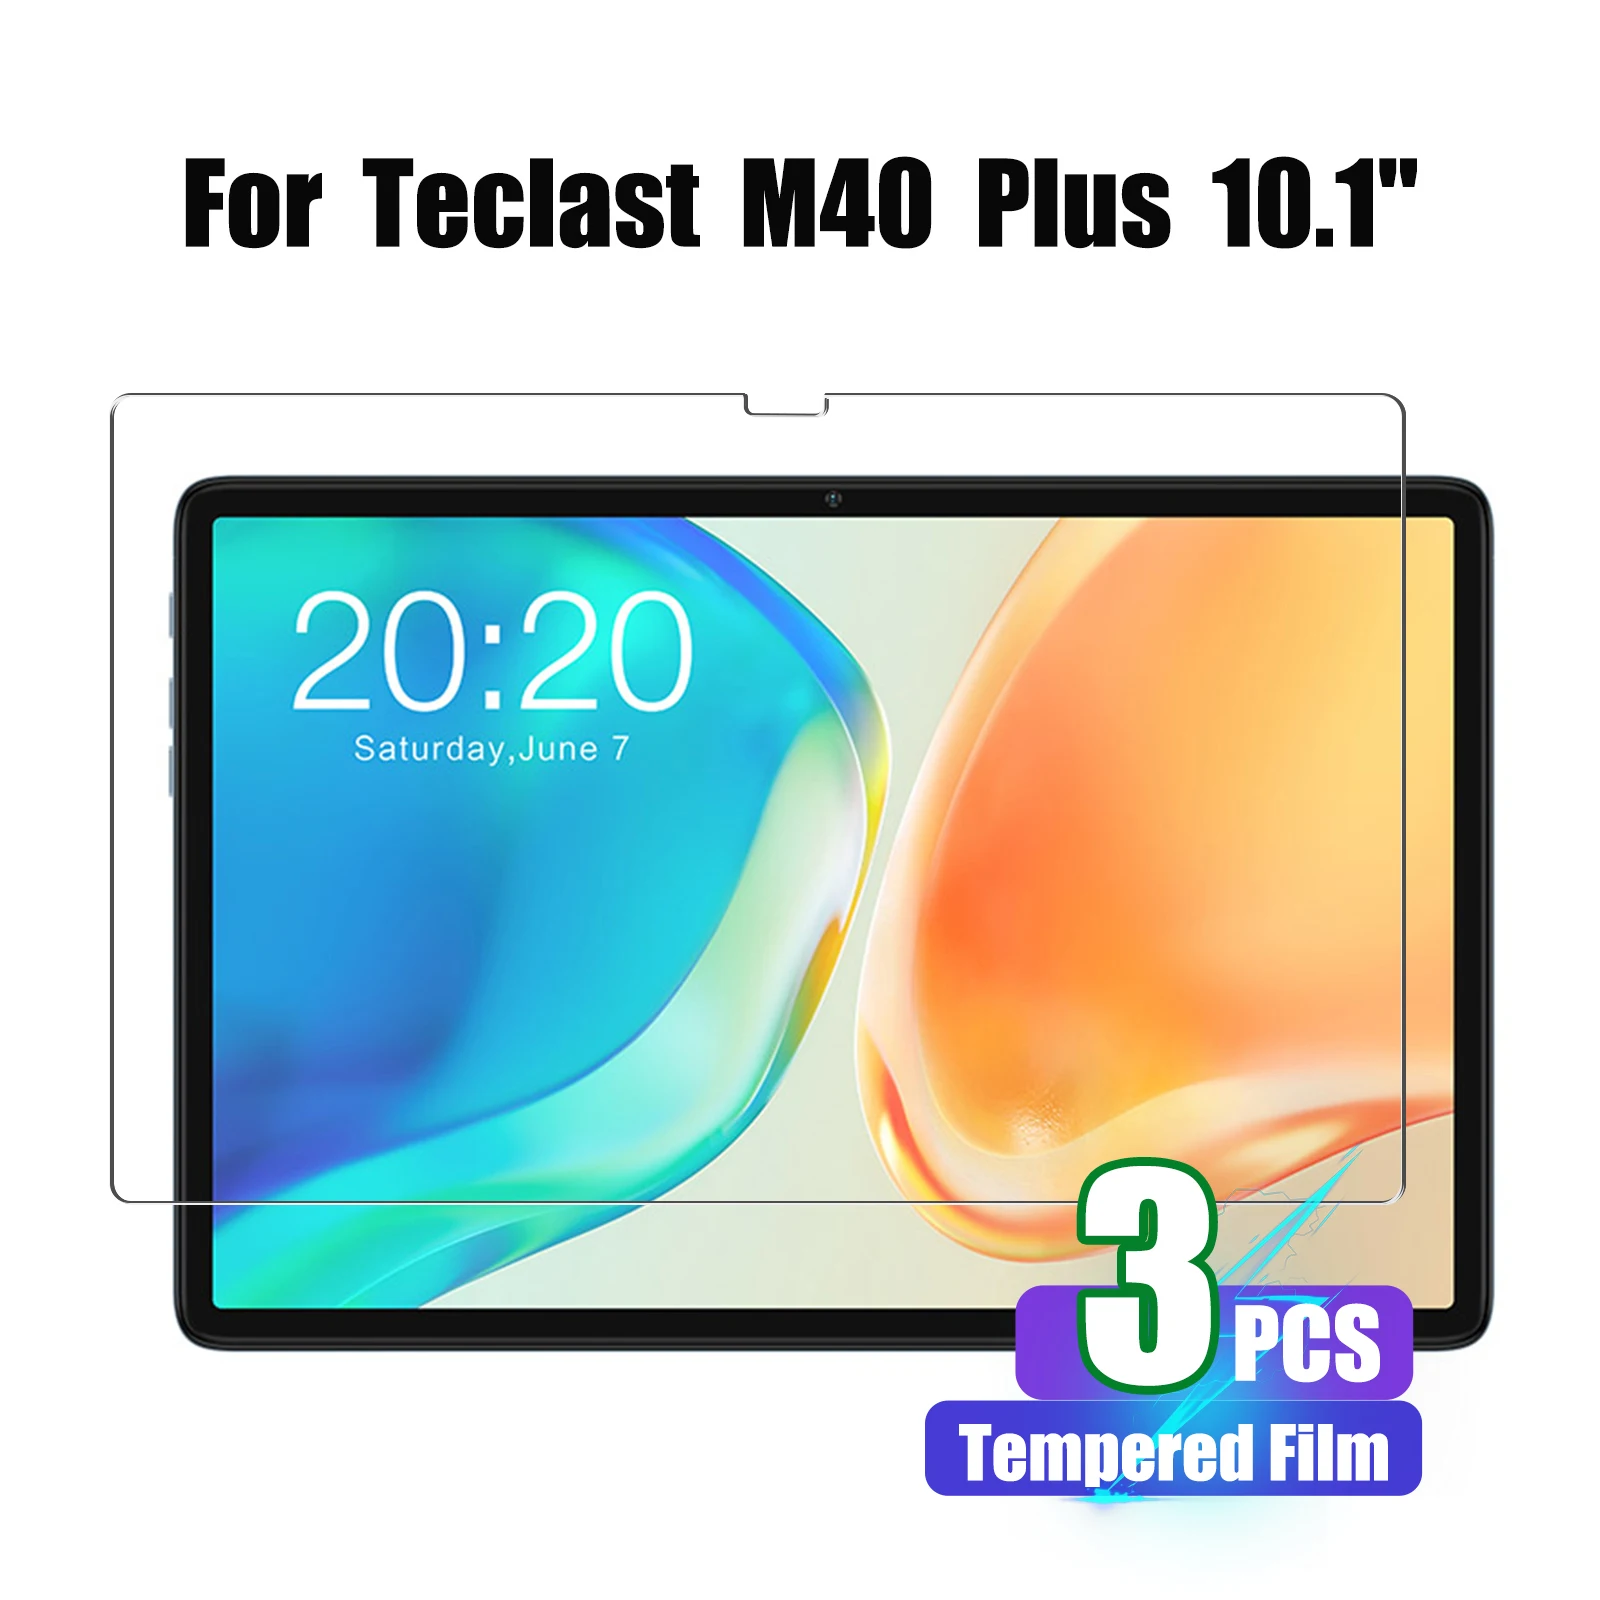 

Screen Protector for Teclast M40 Plus 9H Hardness Bubble Free Tempered Glass Film for Teclast M40 Plus 10.1 Inch